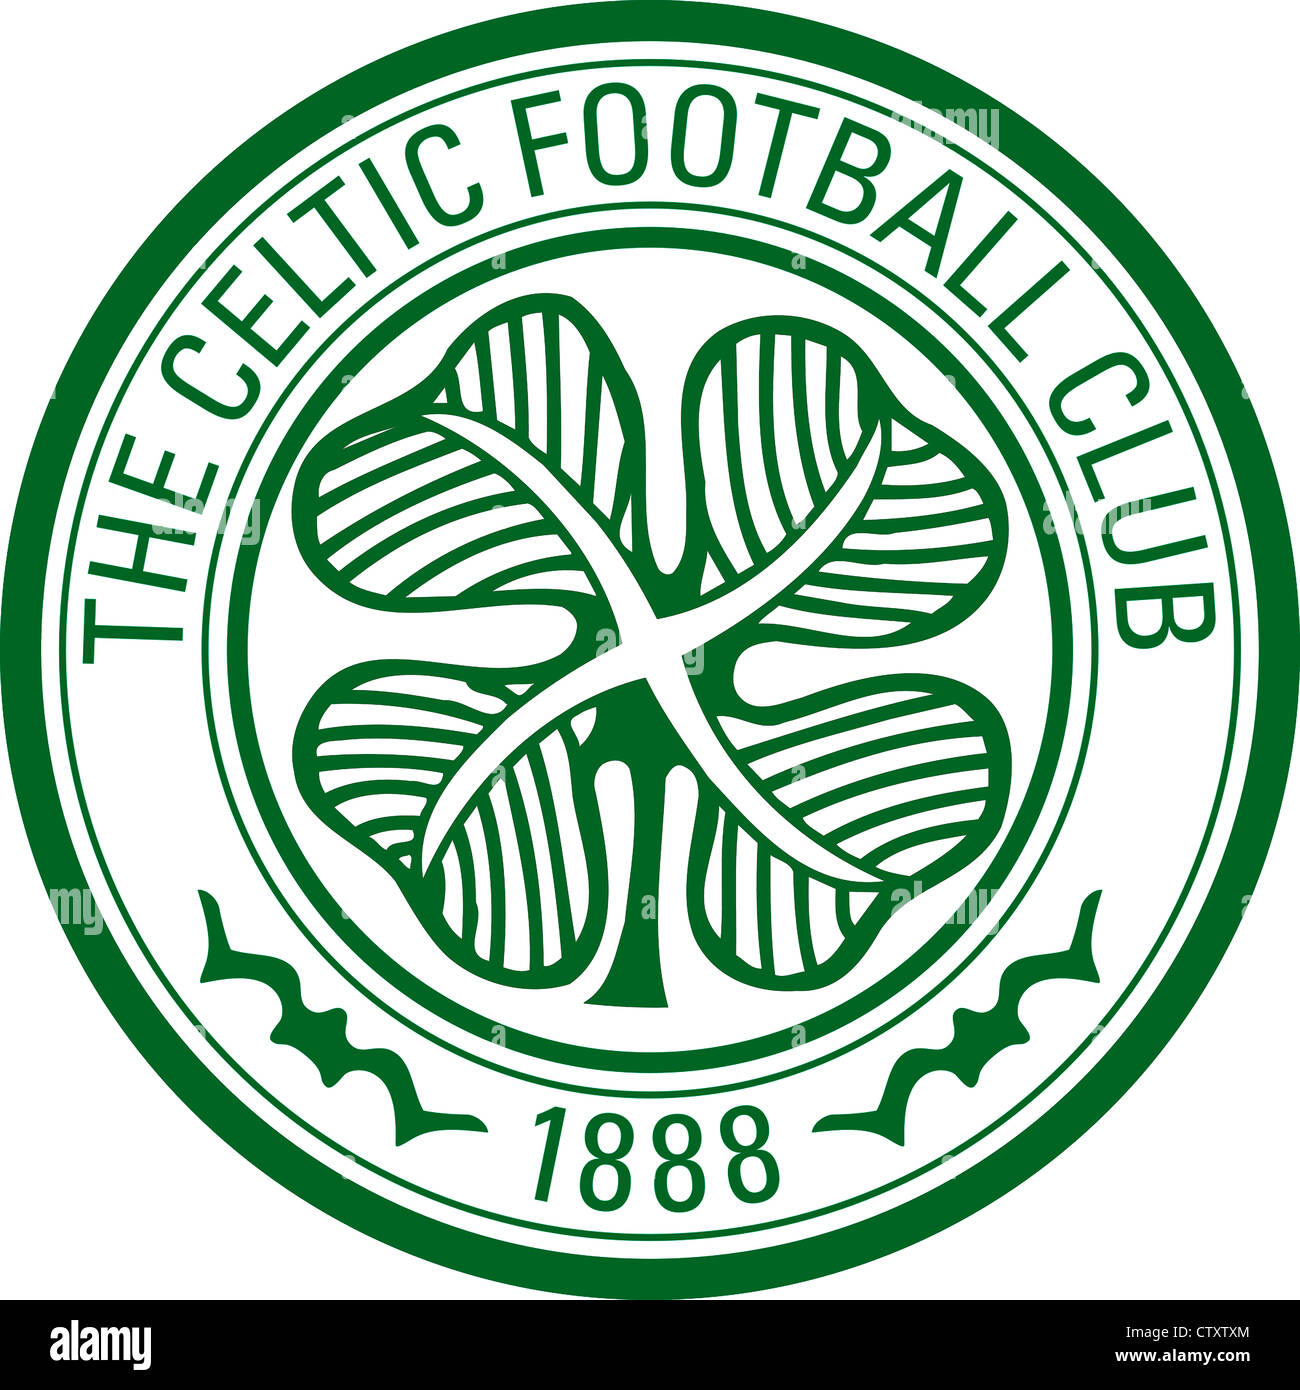 Celtic football club shop hi-res stock photography and images - Alamy